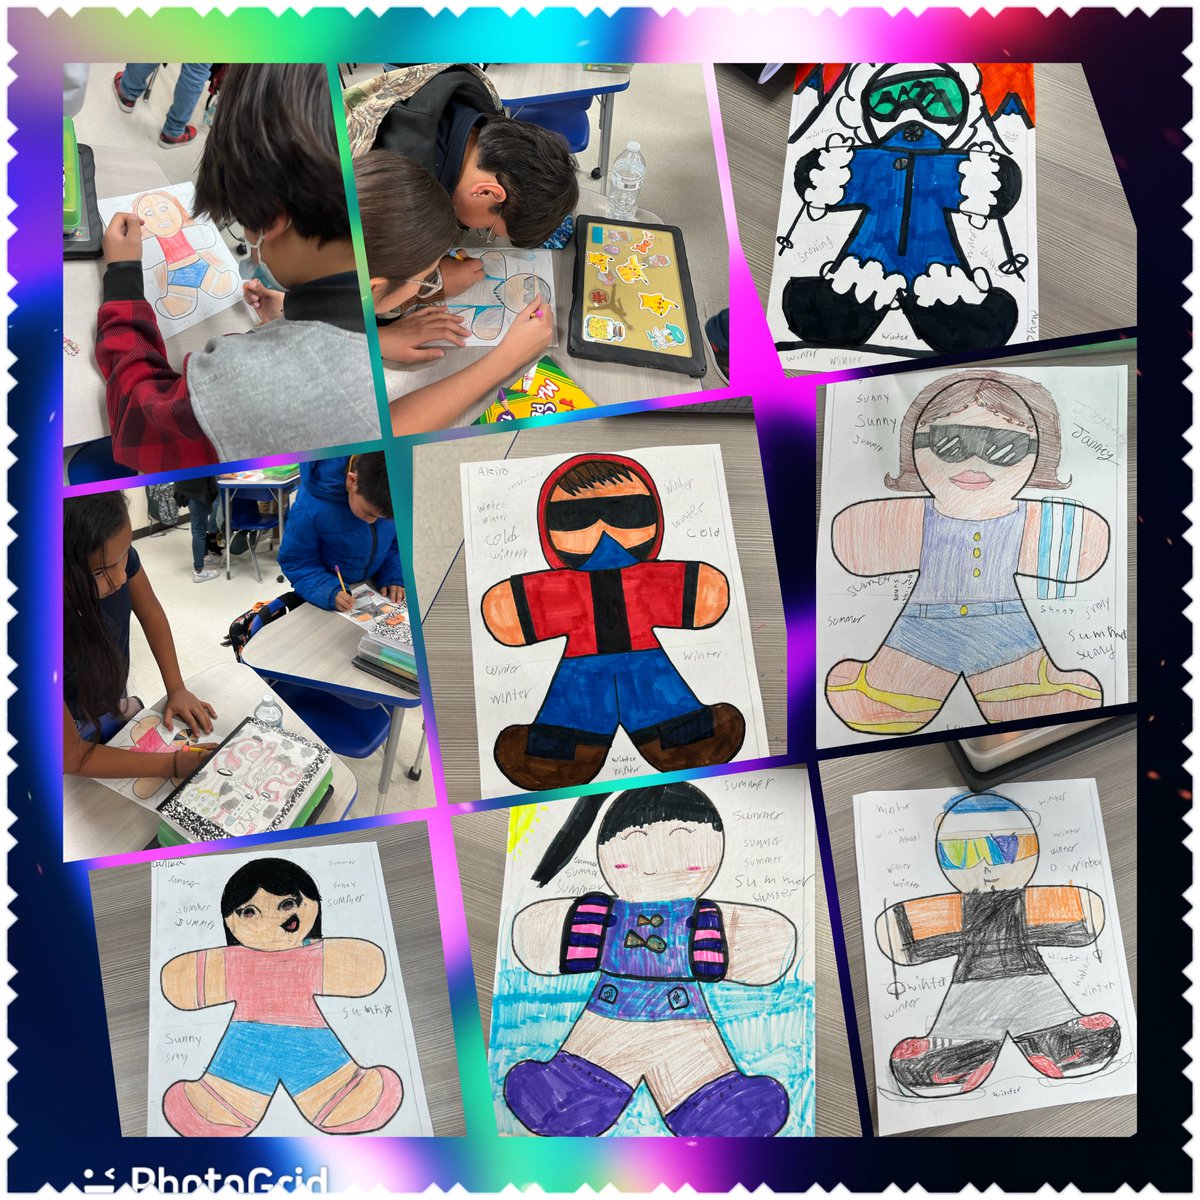 Paper doll prediction was our intro to Weather & Climate. Students designed a doll dressed for all types of weather which led to a gallery walk. We enjoyed seeing all the designs for all types of weather! @AlarconElem #SEISDPeoplePassionPurpose #engage #Science